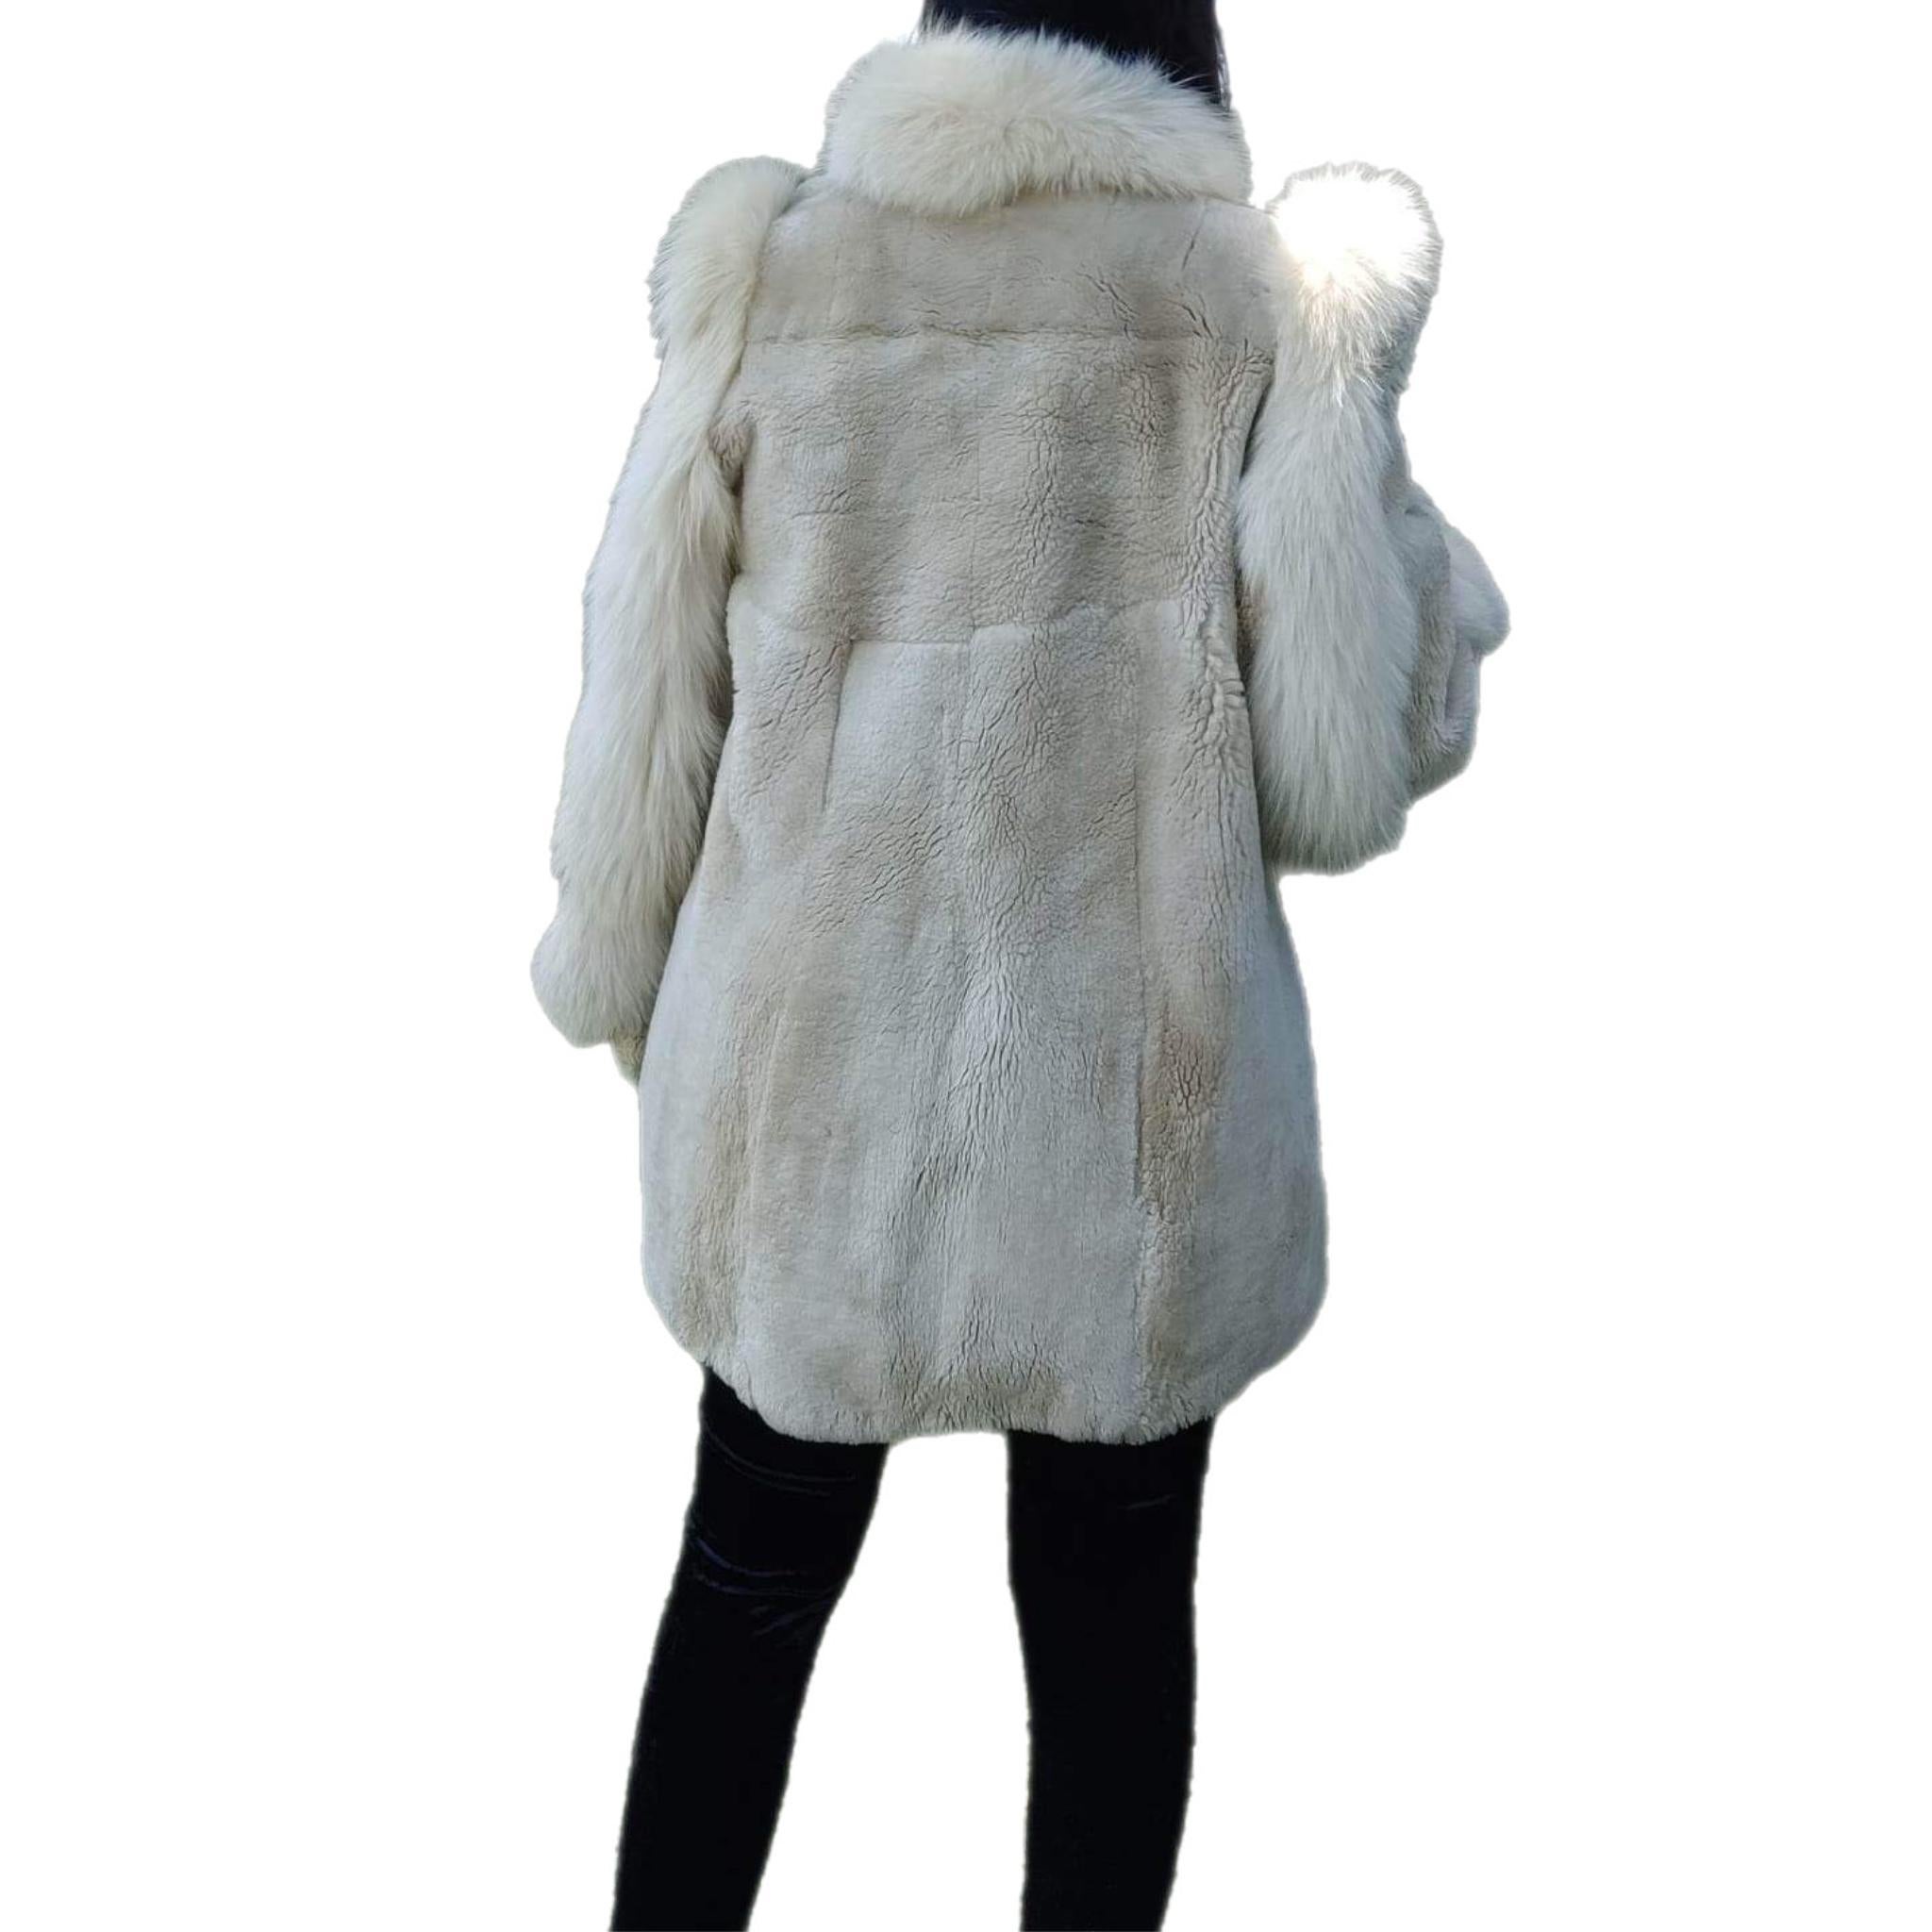 Sheared Beaver Fur Coat with Fur Trim (Size 8-M) For Sale 4